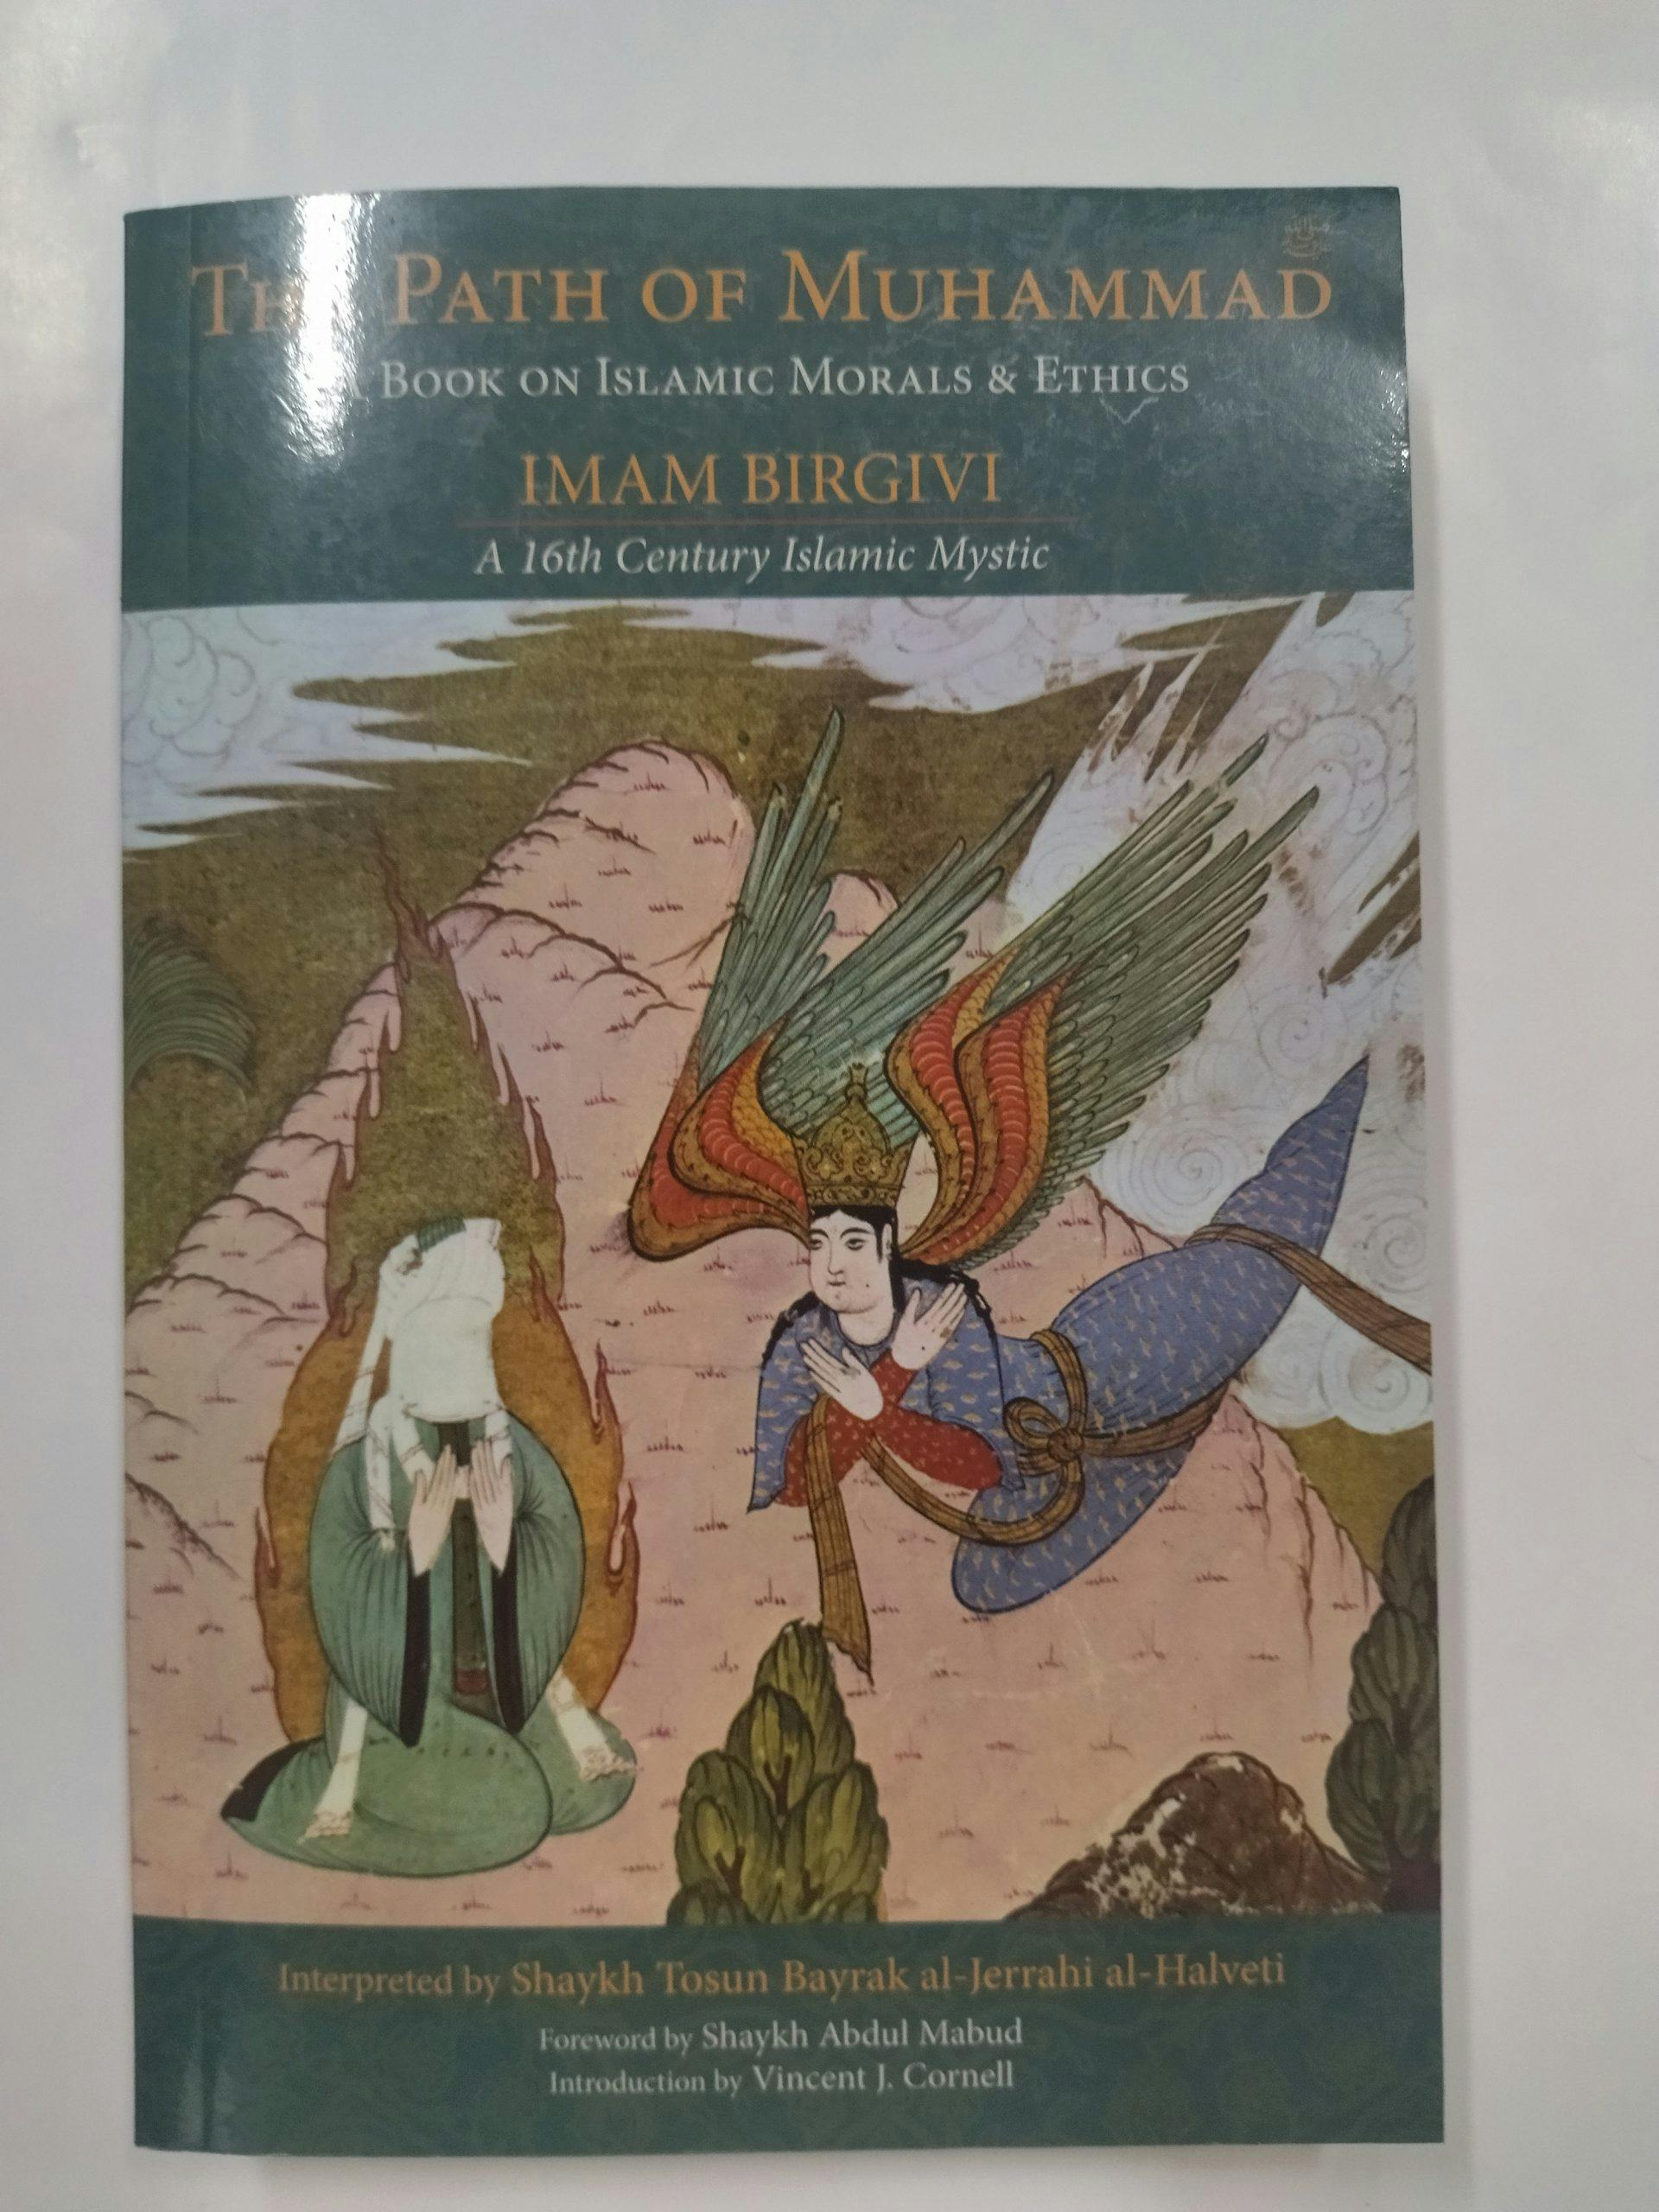 The Path of Muhammad: A Book on Islamic Morals & Ethics by Imam Birgivi